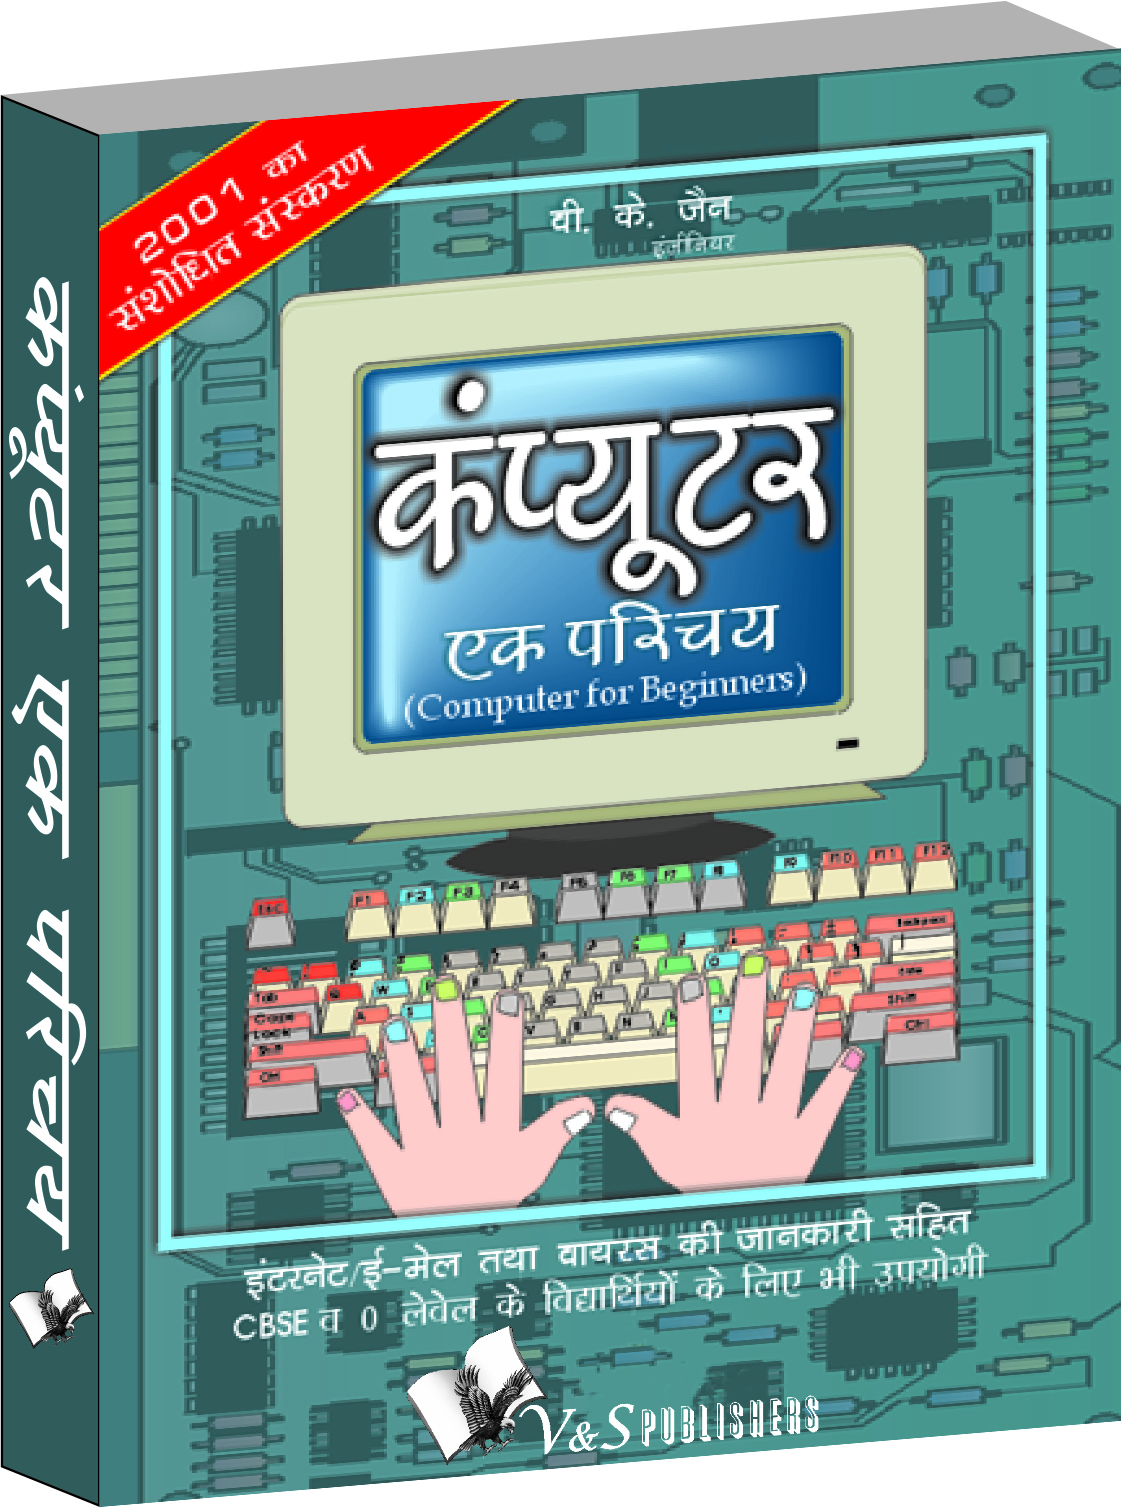 Computer Ek Parichay-Elementary introduction to working of computers, in Hindi